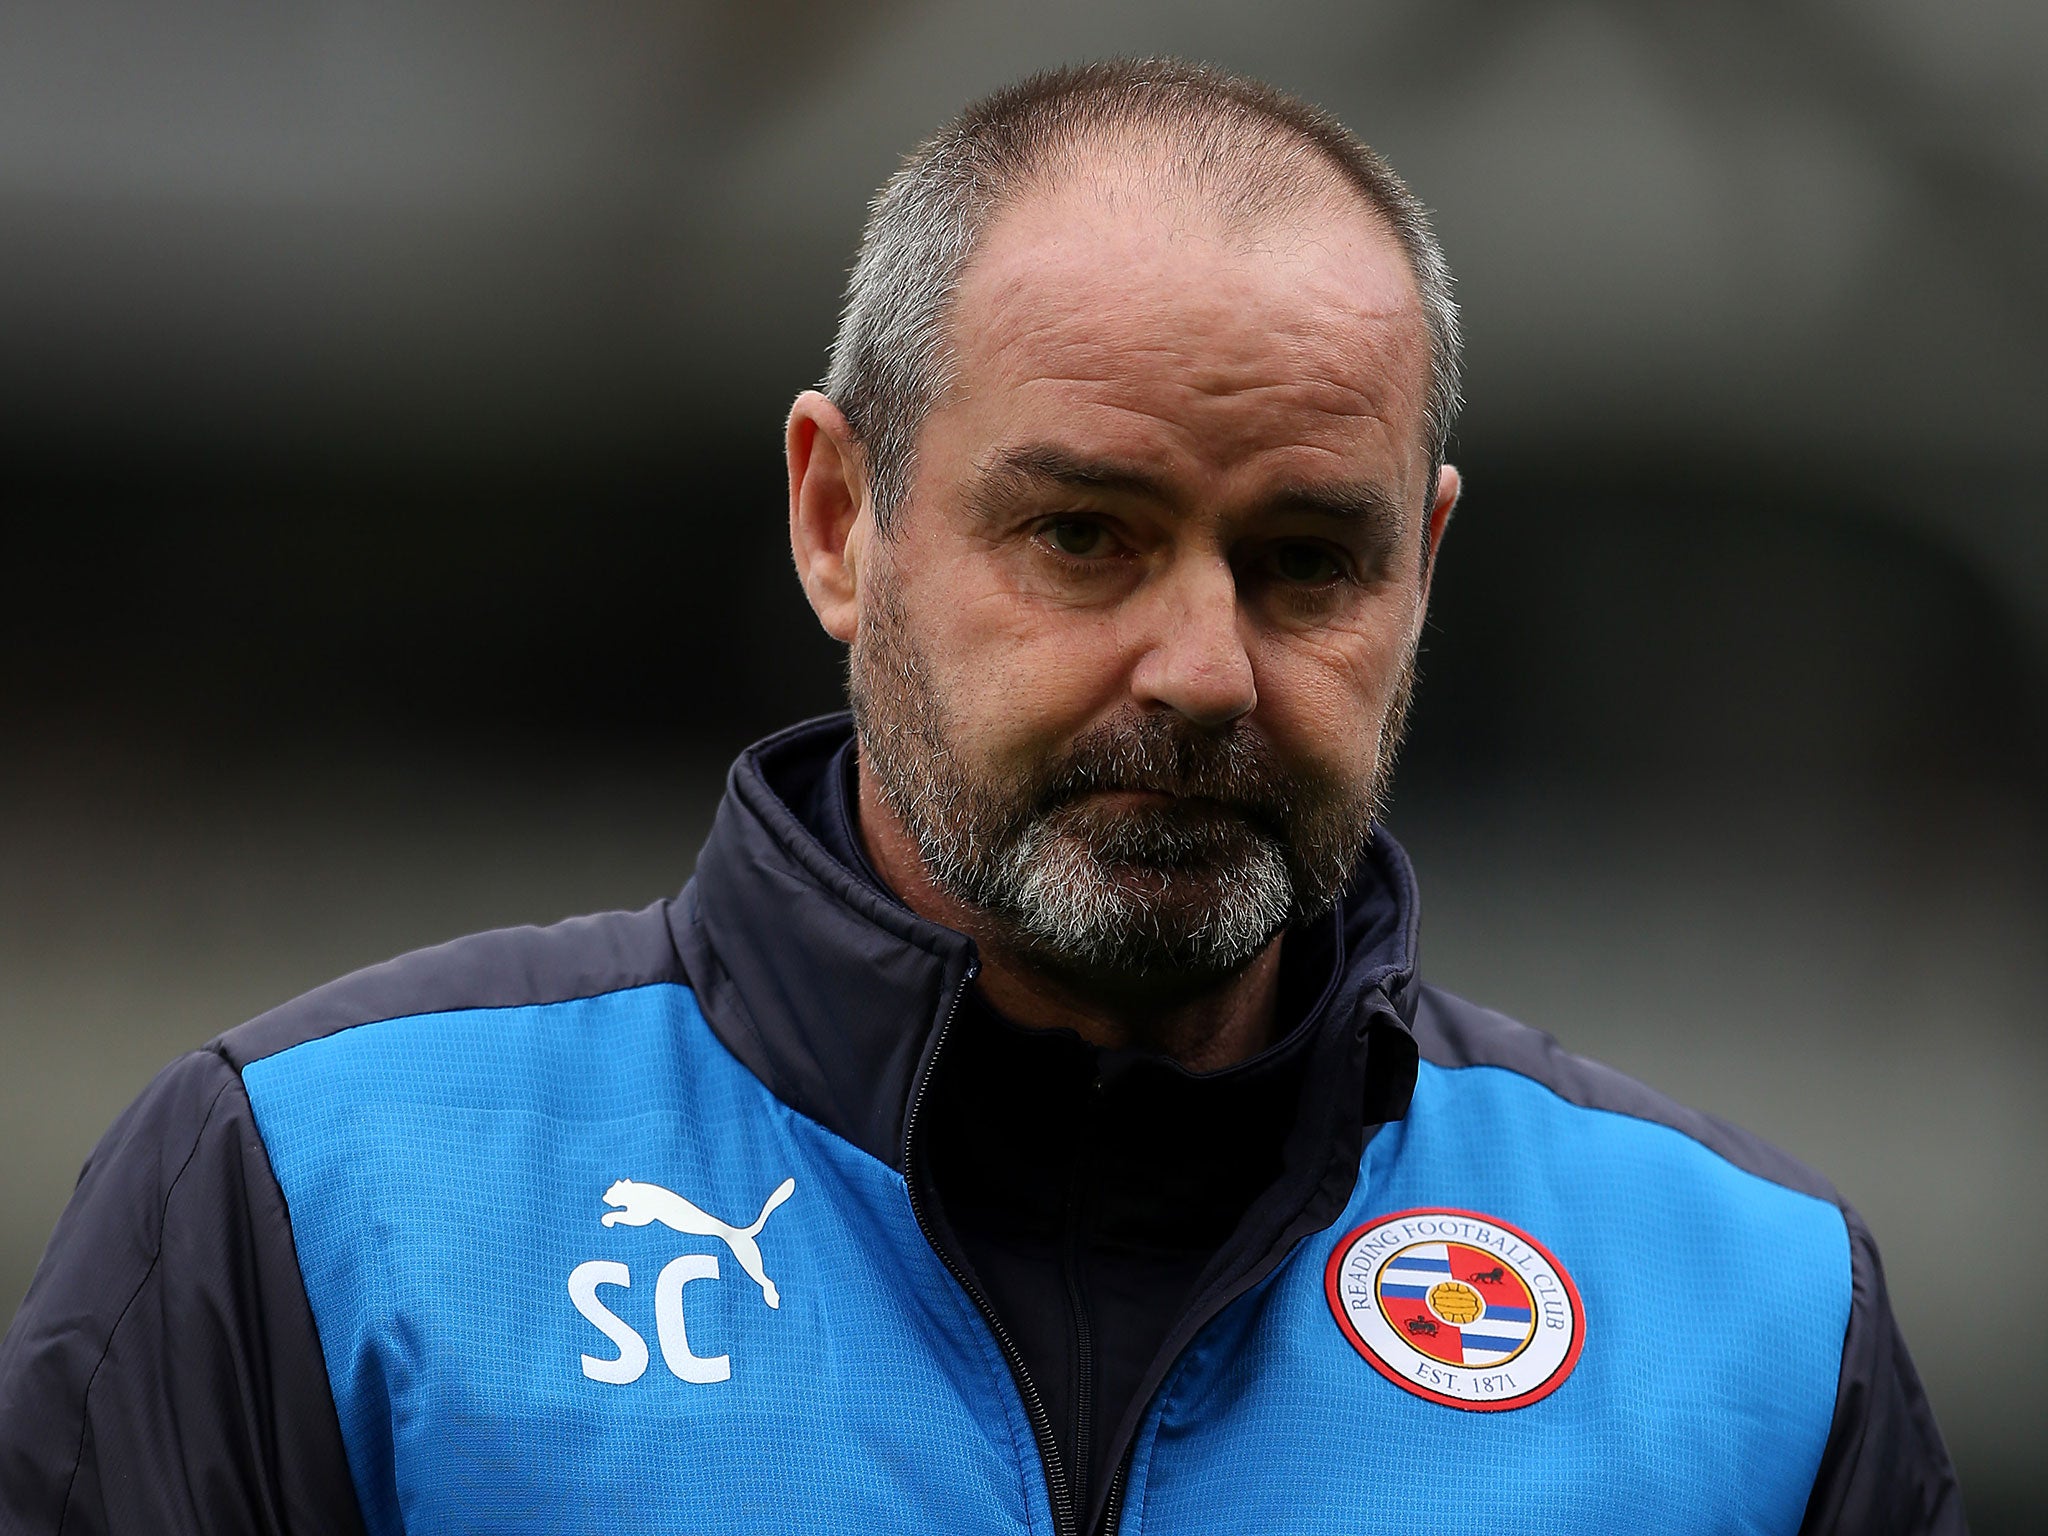 Steve Clarke has been sacked by Reading